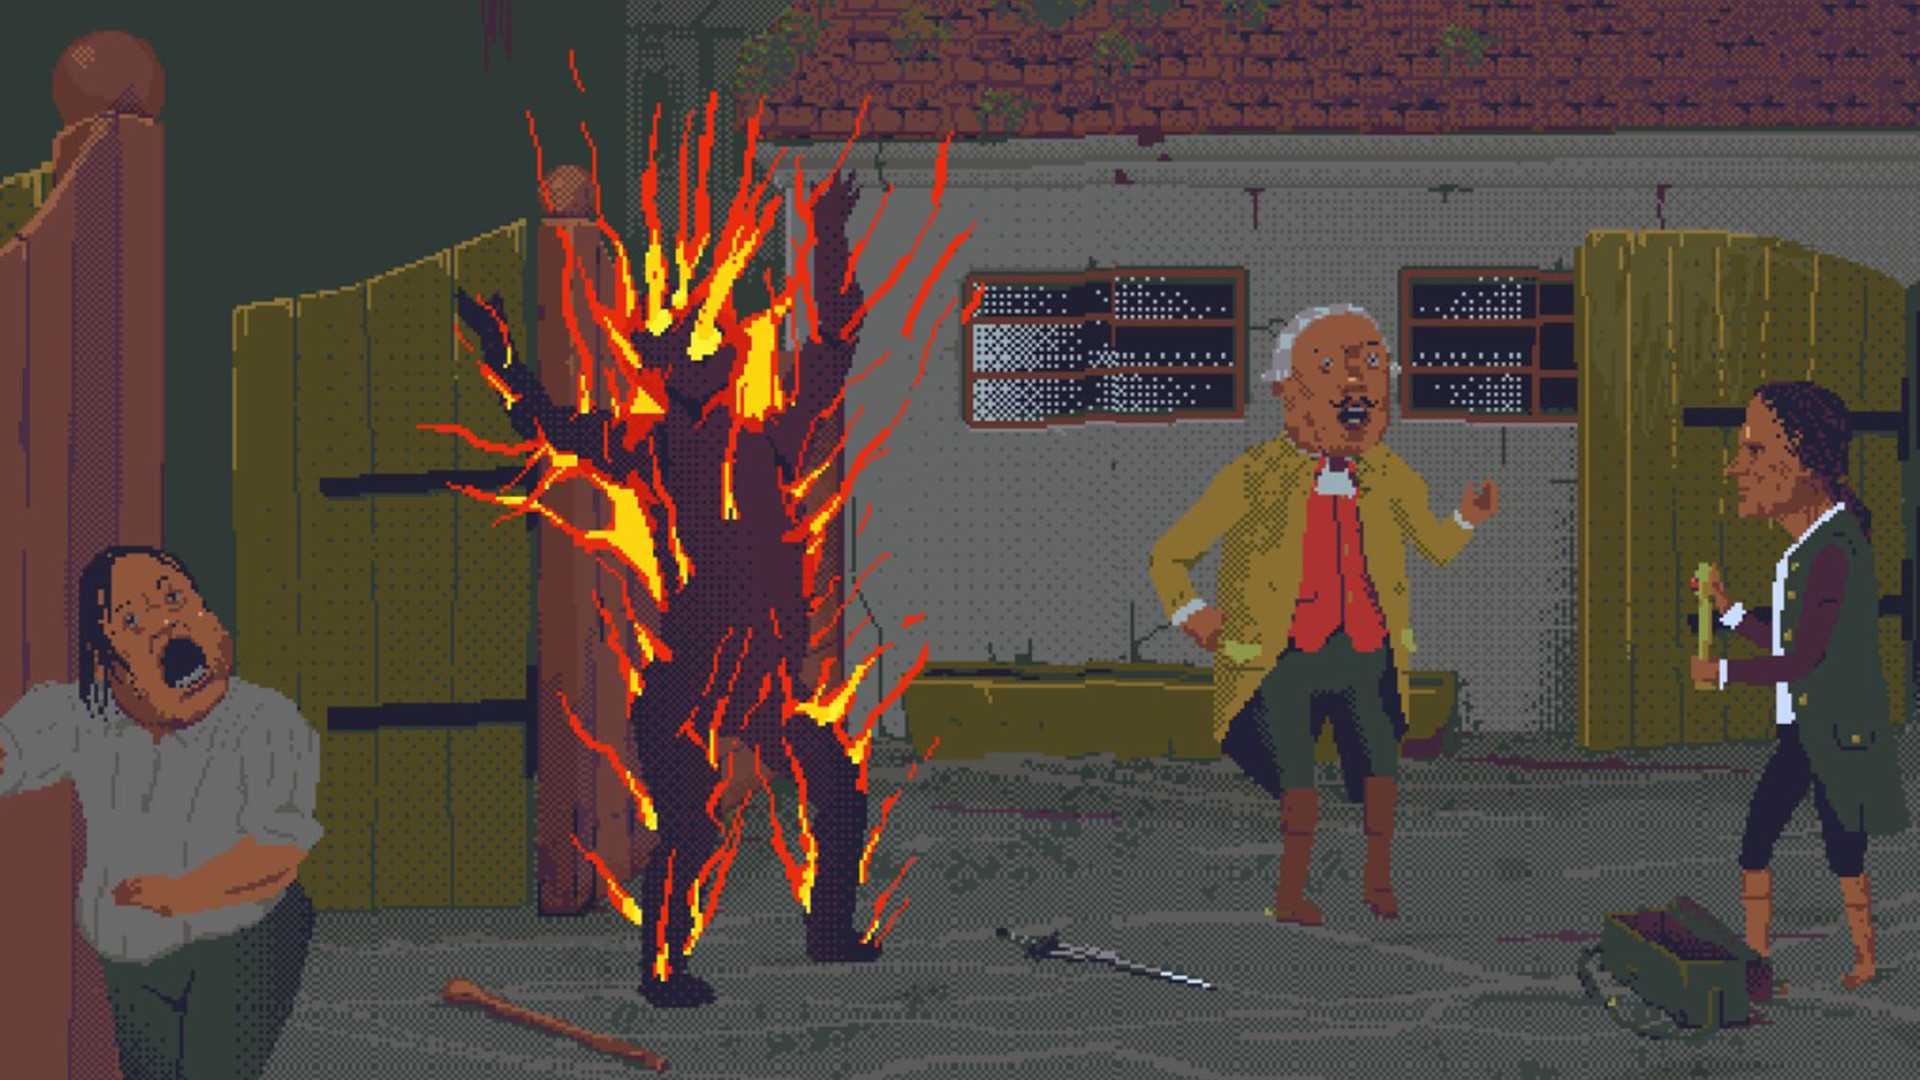 Man on fire in front of a crowd